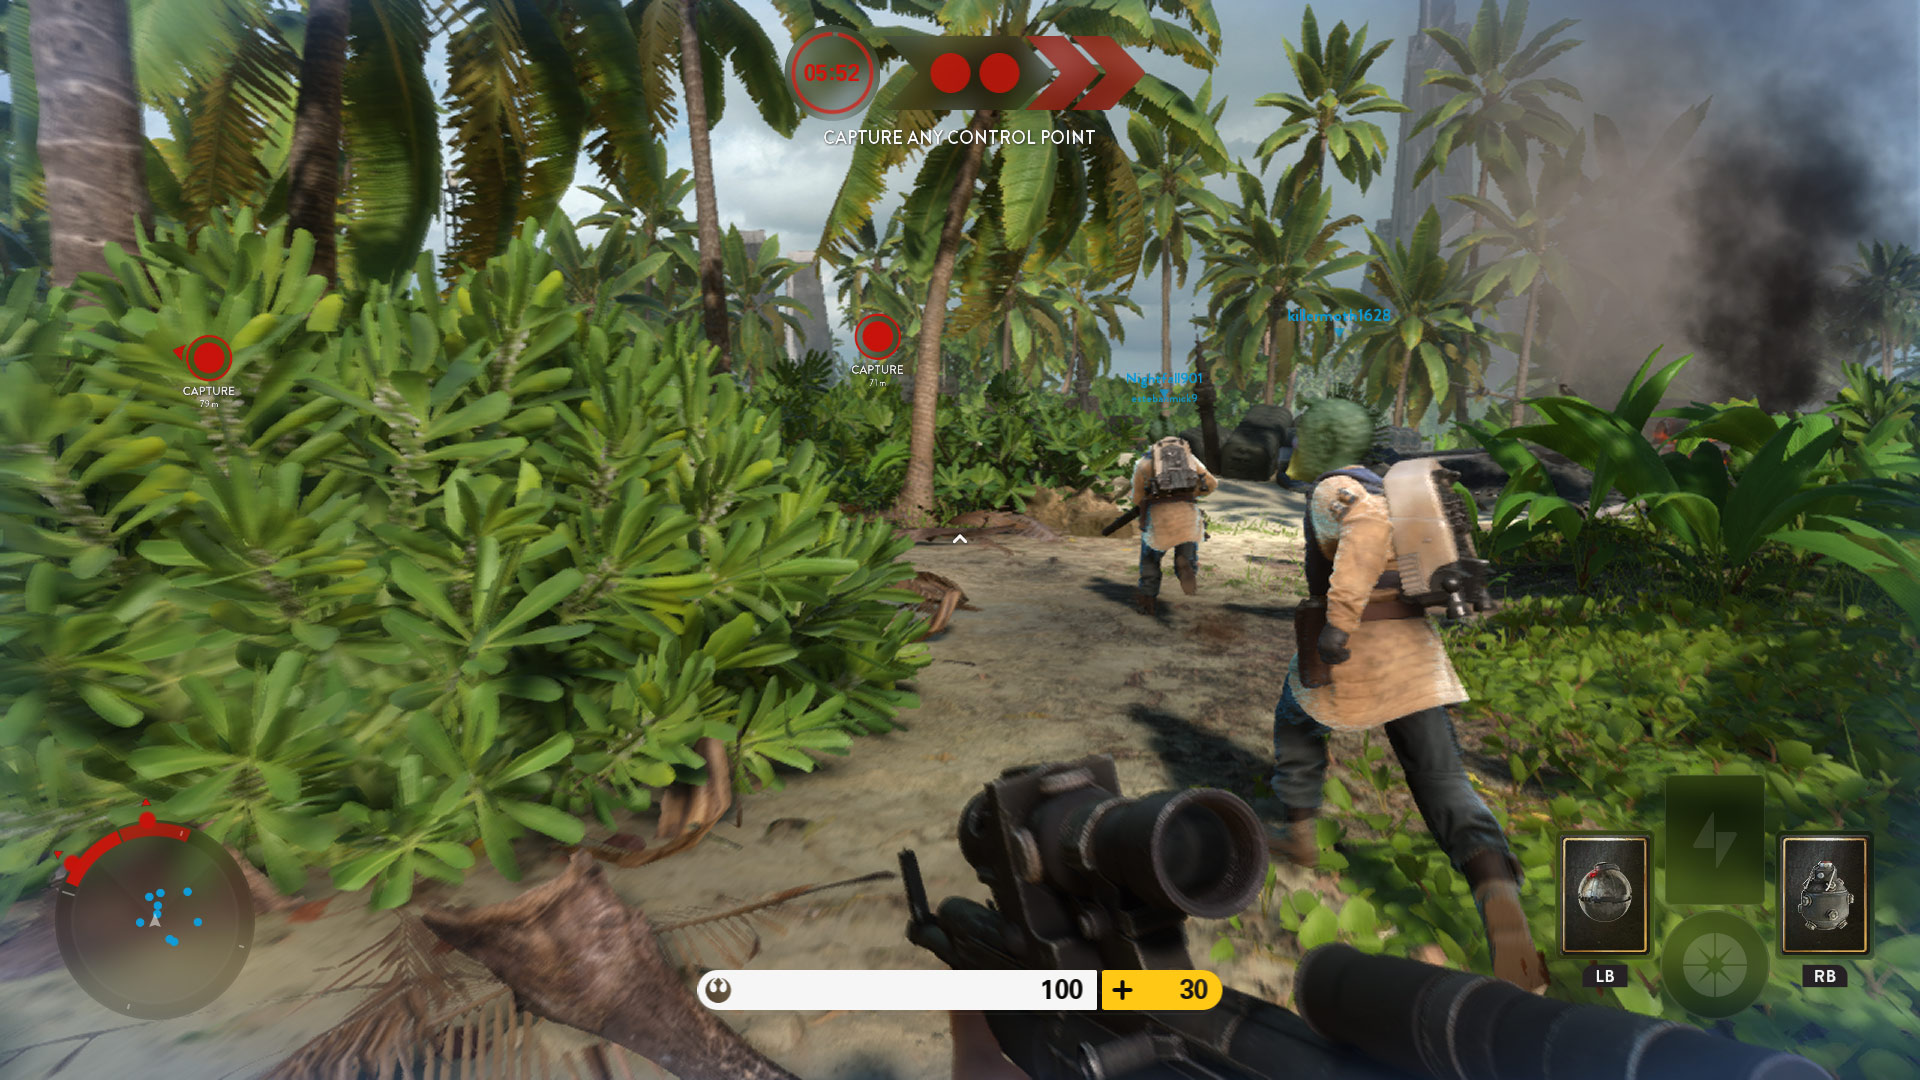 Star Wars Battlefront 2 Seems to have Desired Missing Features